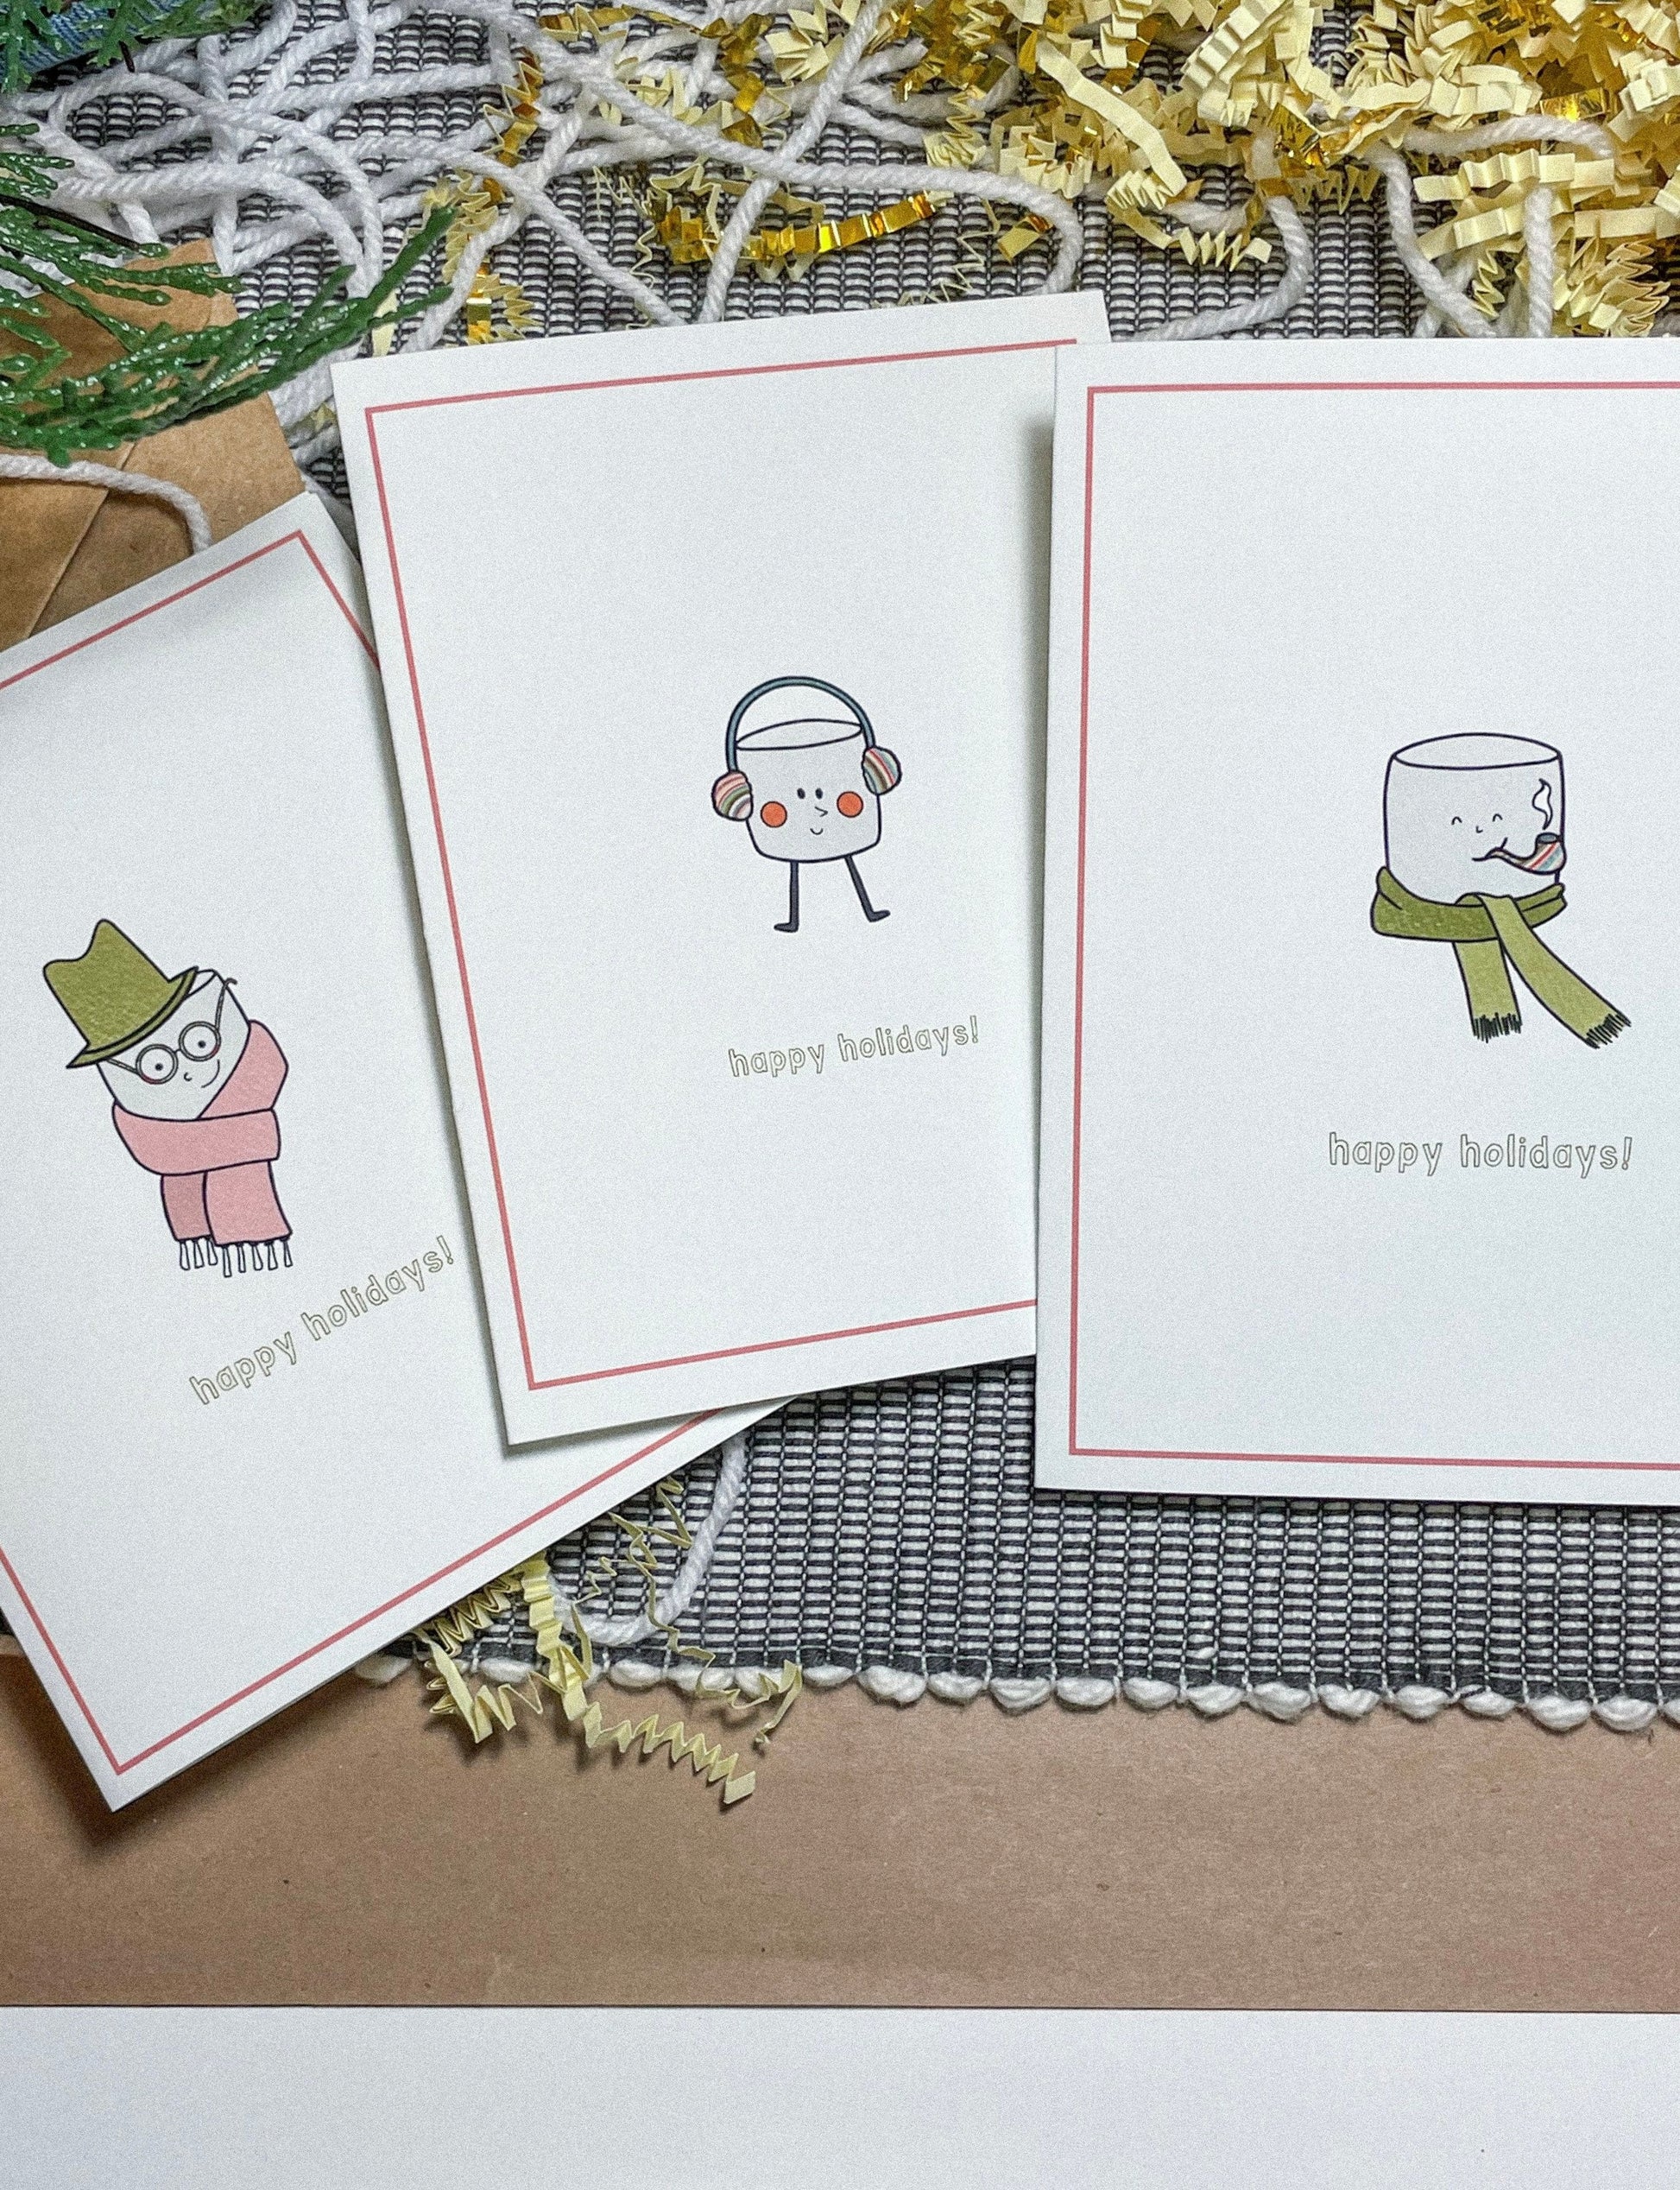 This holiday card features a drawing of a cute little marshmallow man with a scarf and a top hat with the text 'happy holidays!" This shows all 3 of the separate Marshmallow people cards - they are just too cute!